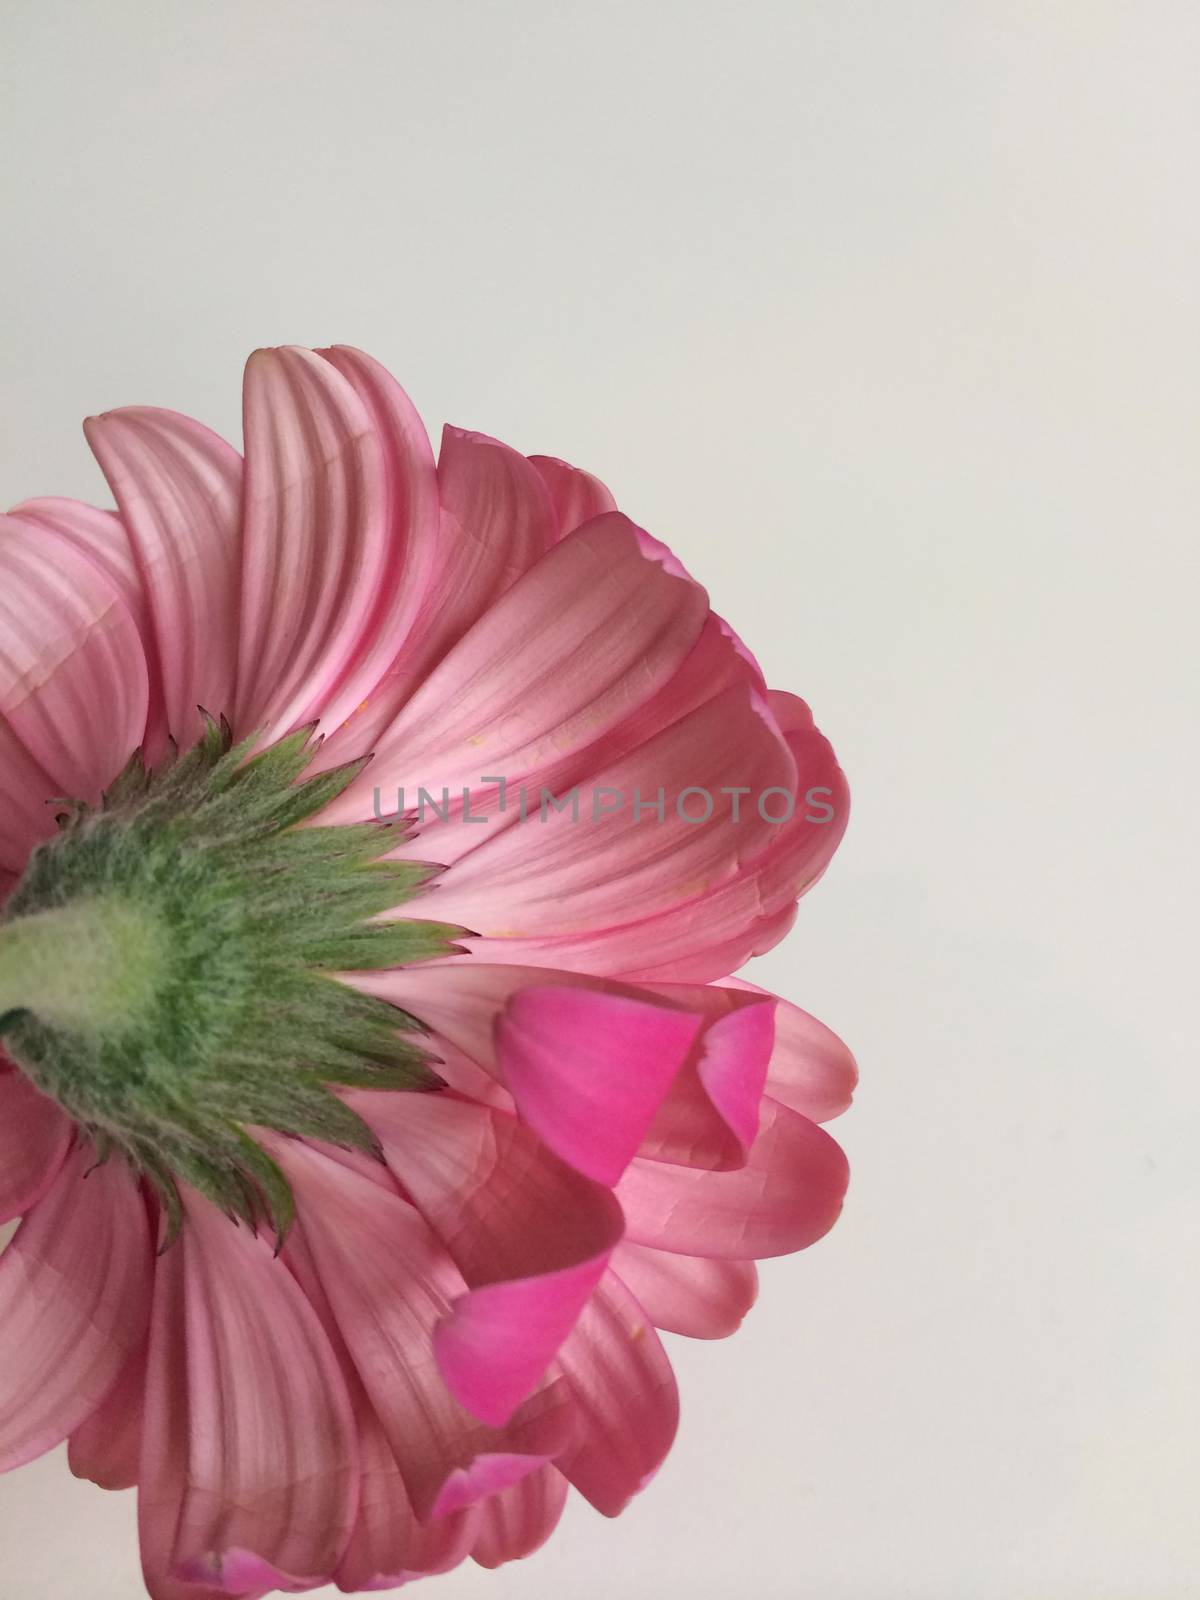 Bright pink daisy by mmm